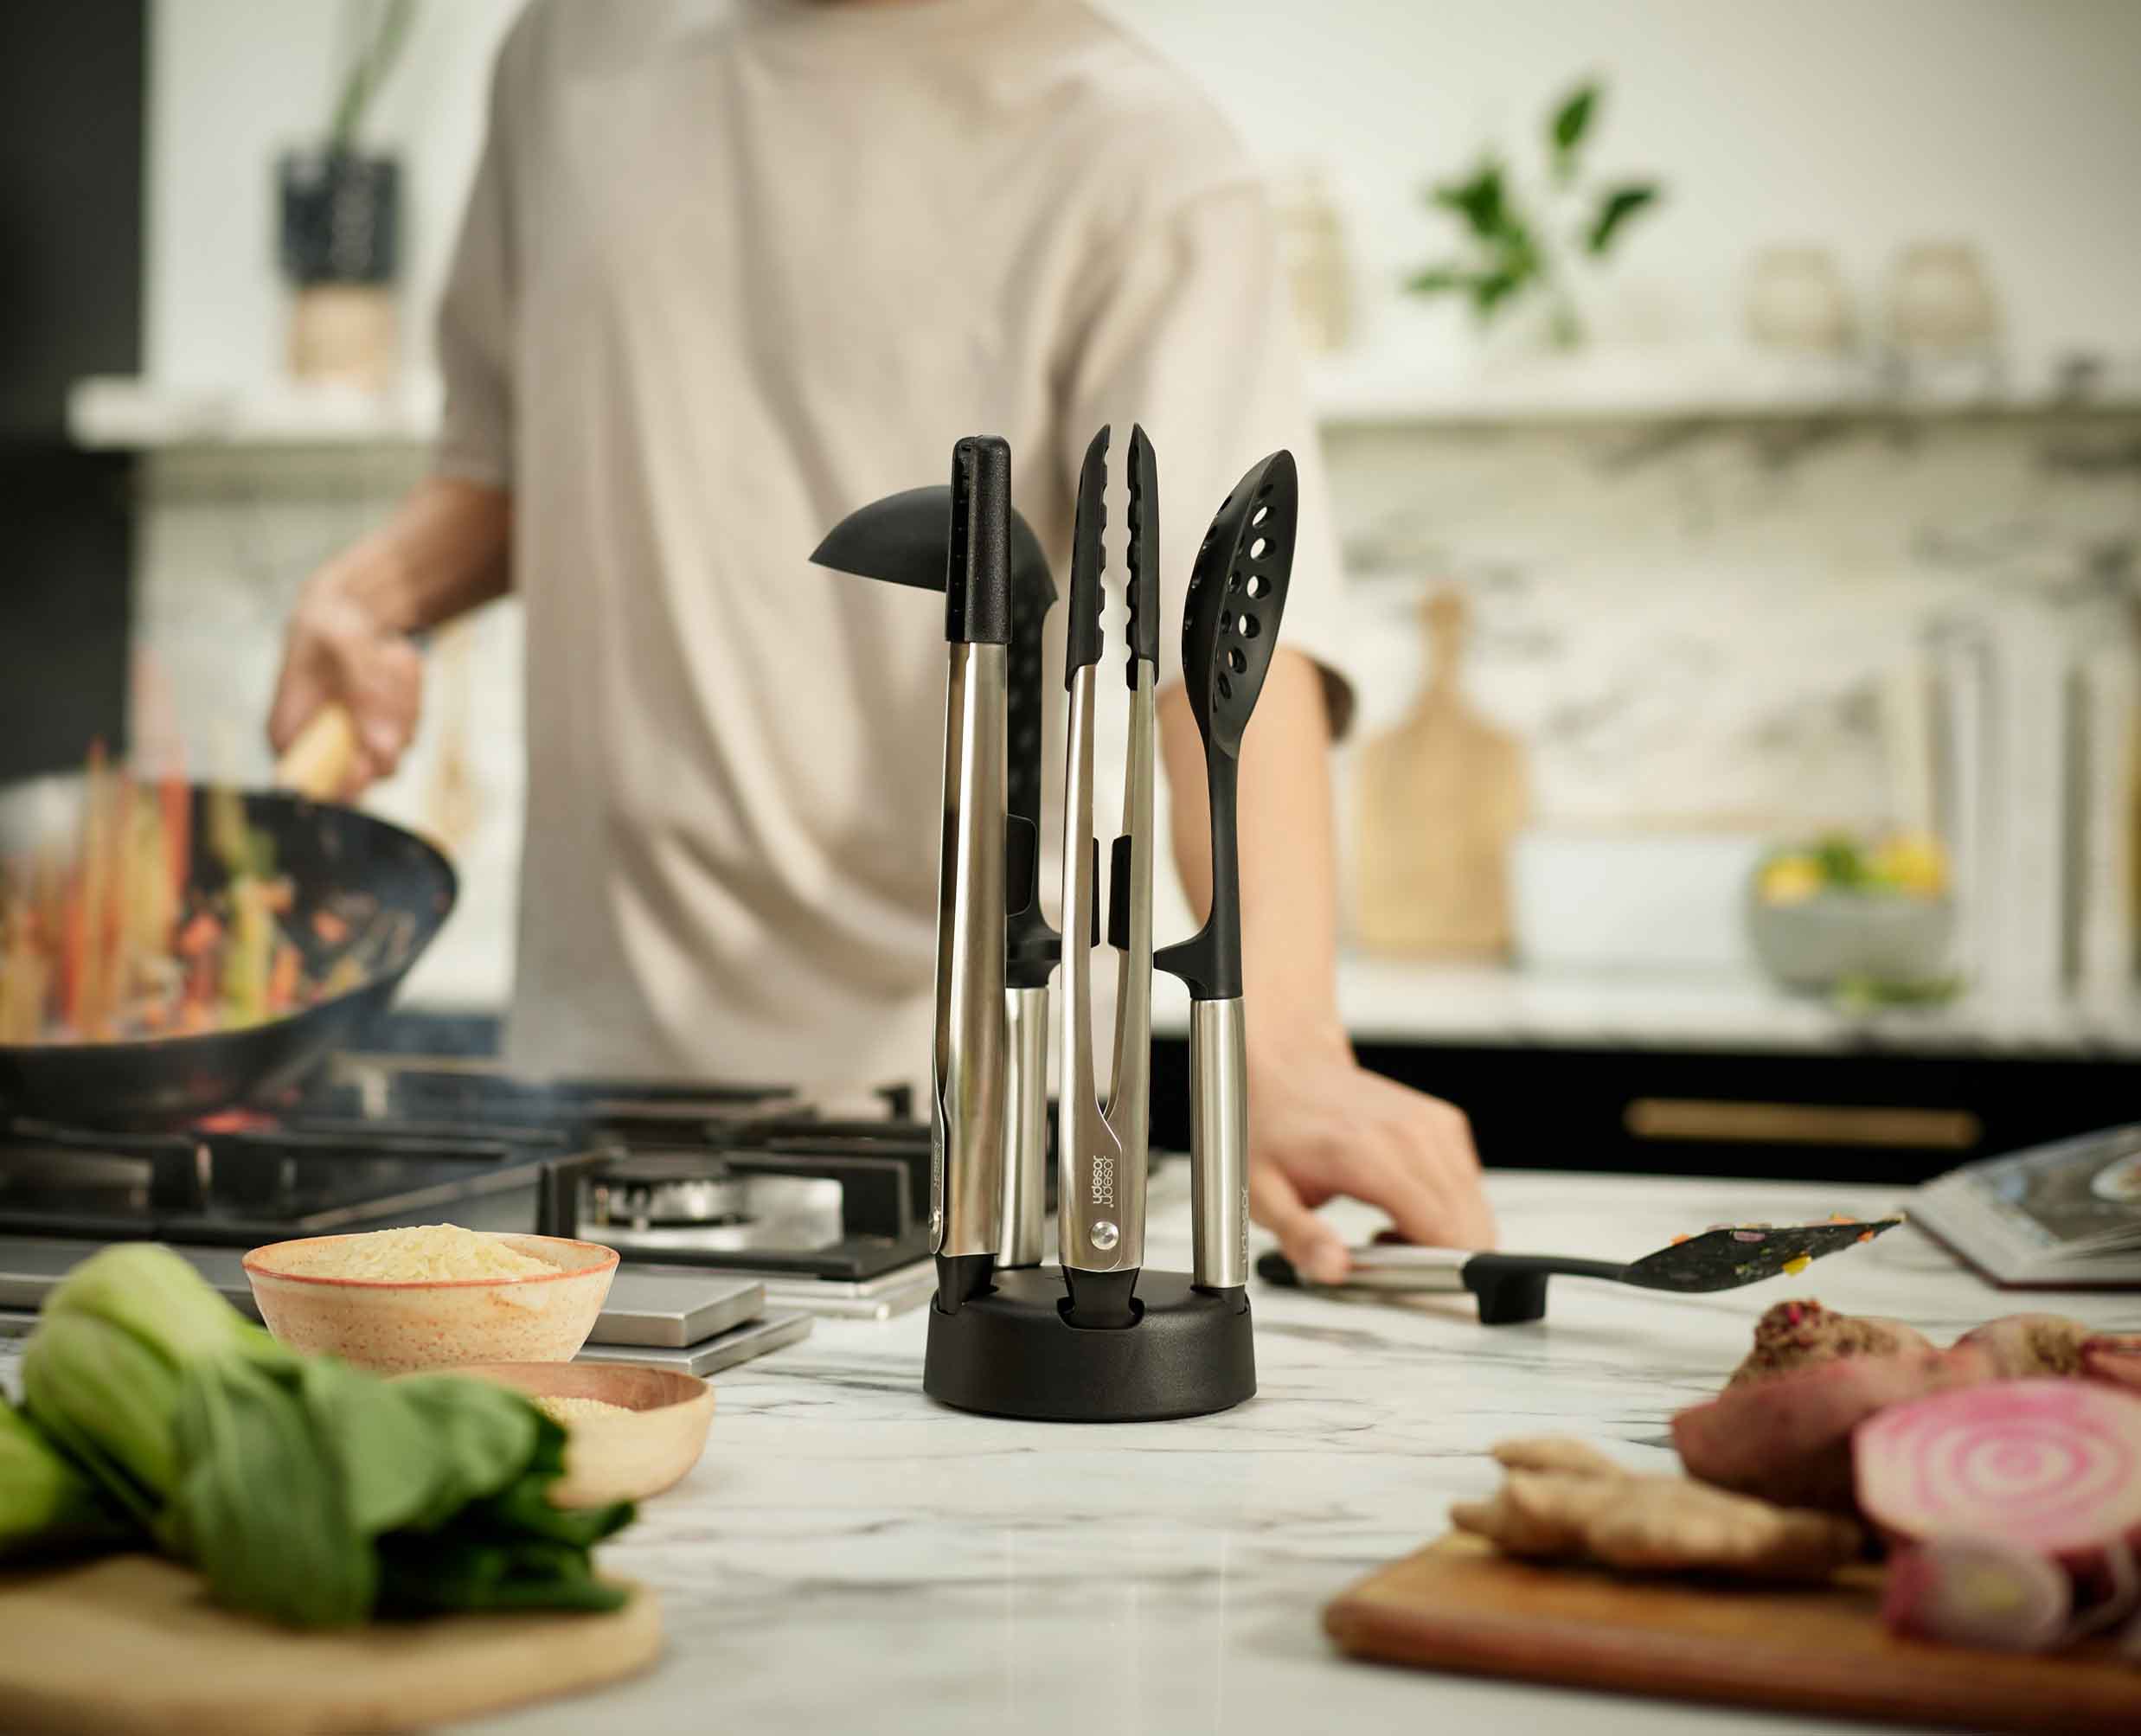 Elevate™ Fusion 5-piece Utensil Set with Compact Stand - 10568 - Image 3